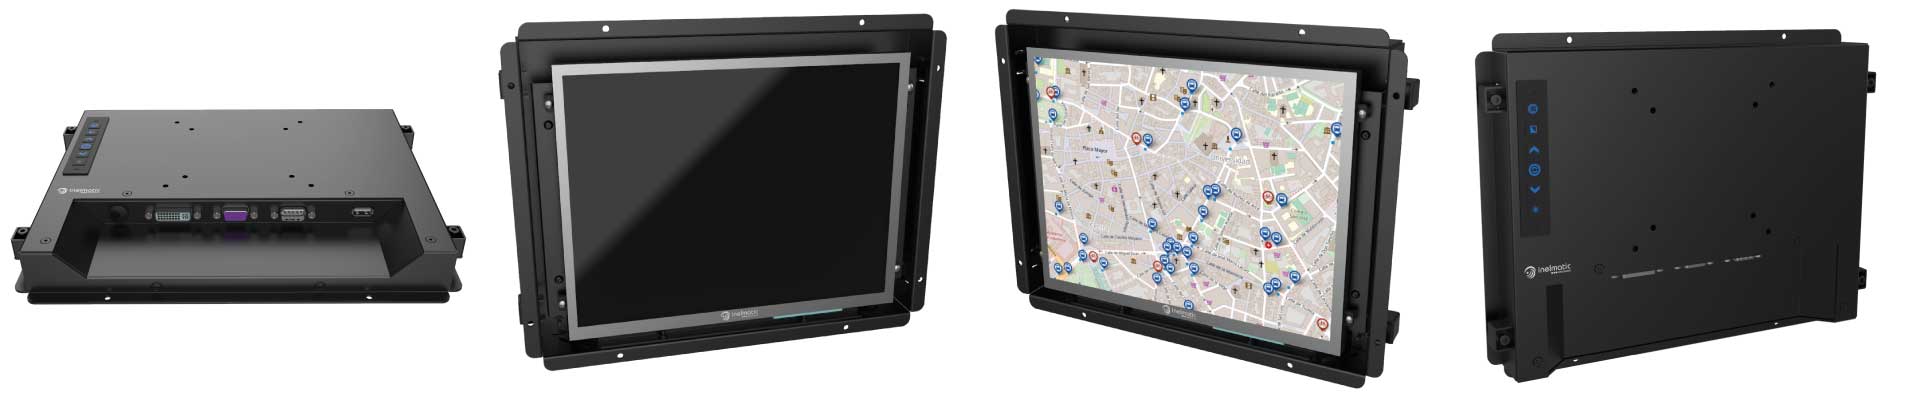 Industrial and vehicular metal frame monitor - Inelmatic